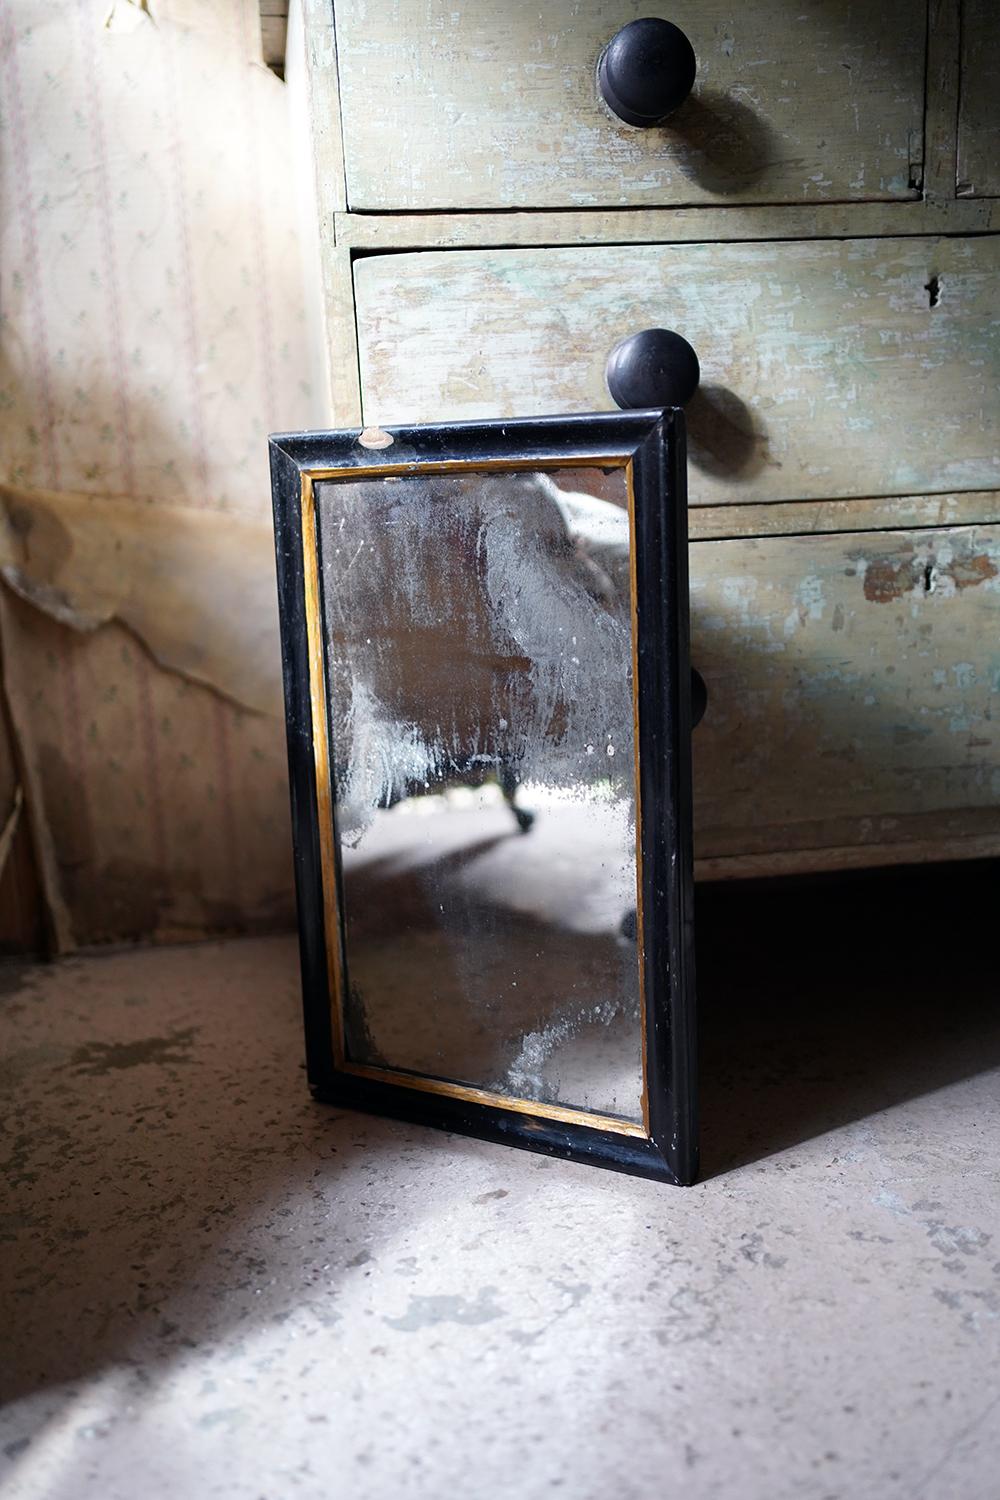 Victorian Ebonised Mercury Plated Rectangular Wall Mirror c.1875-85 In Good Condition For Sale In Bedford, Bedfordshire